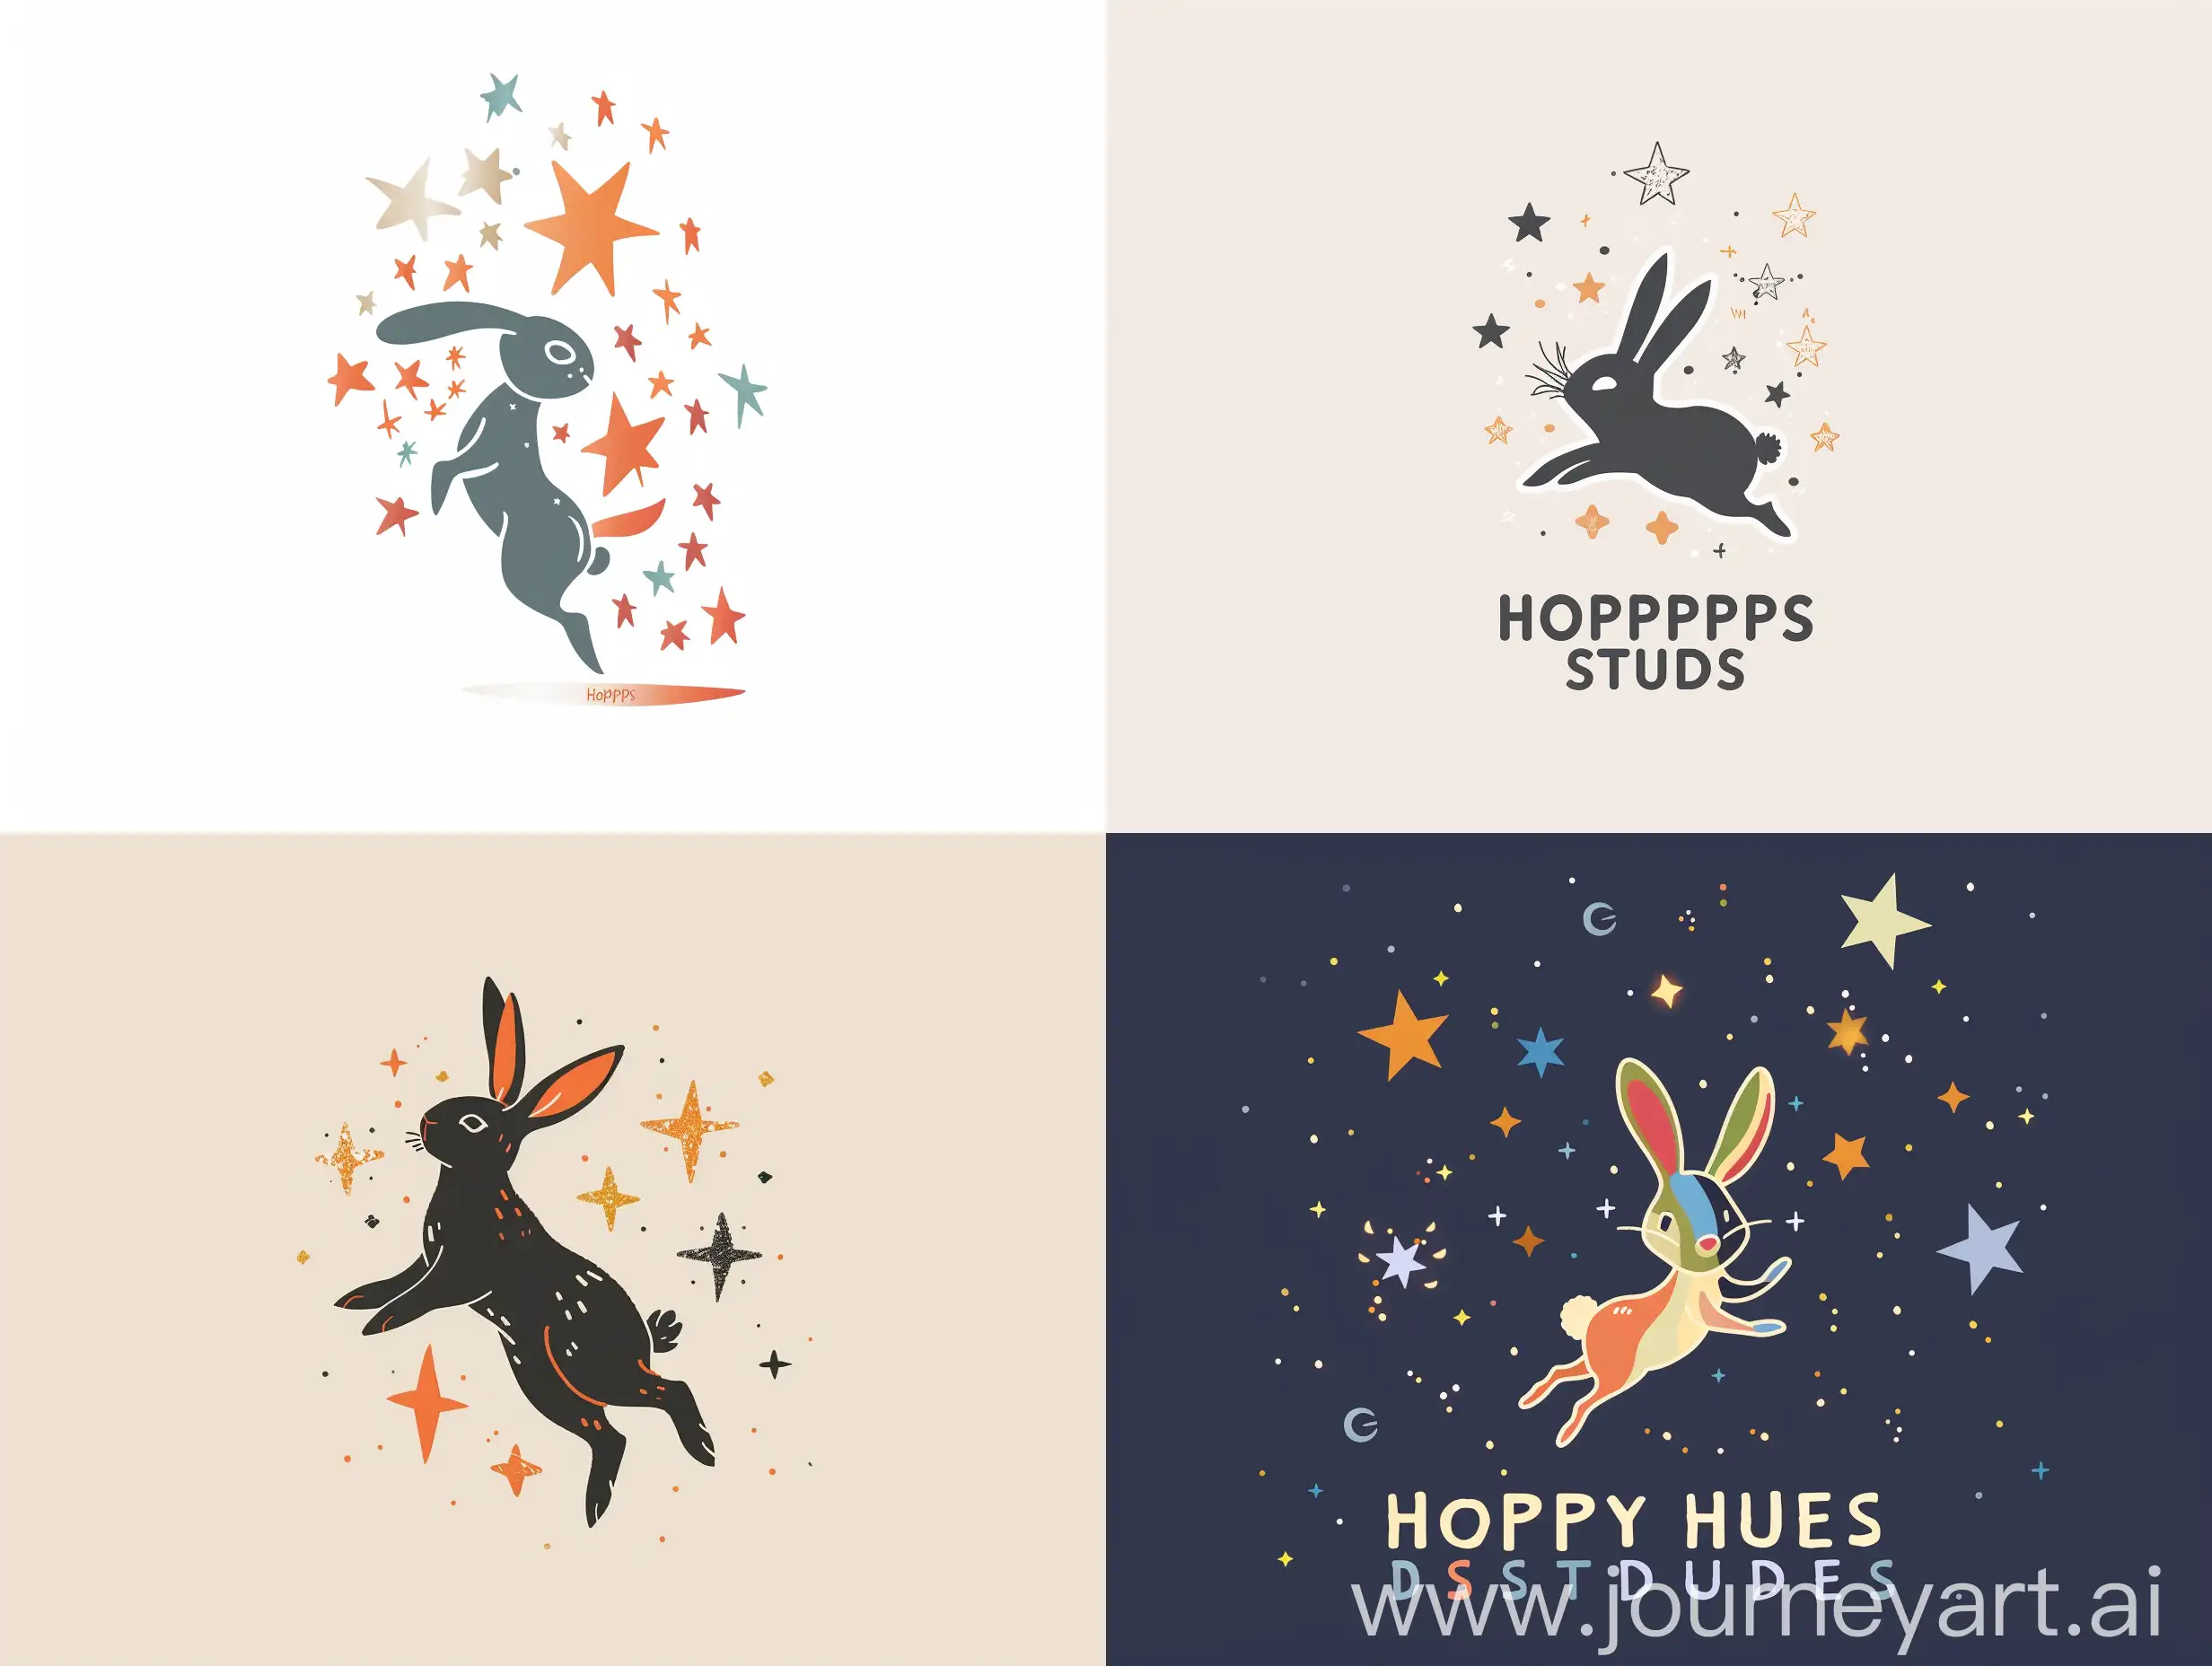 An emblem logo for a design studio called 'Hoppy Hues studio', featuring a rabbit hopping towards the stars, to symbolize magical creativity